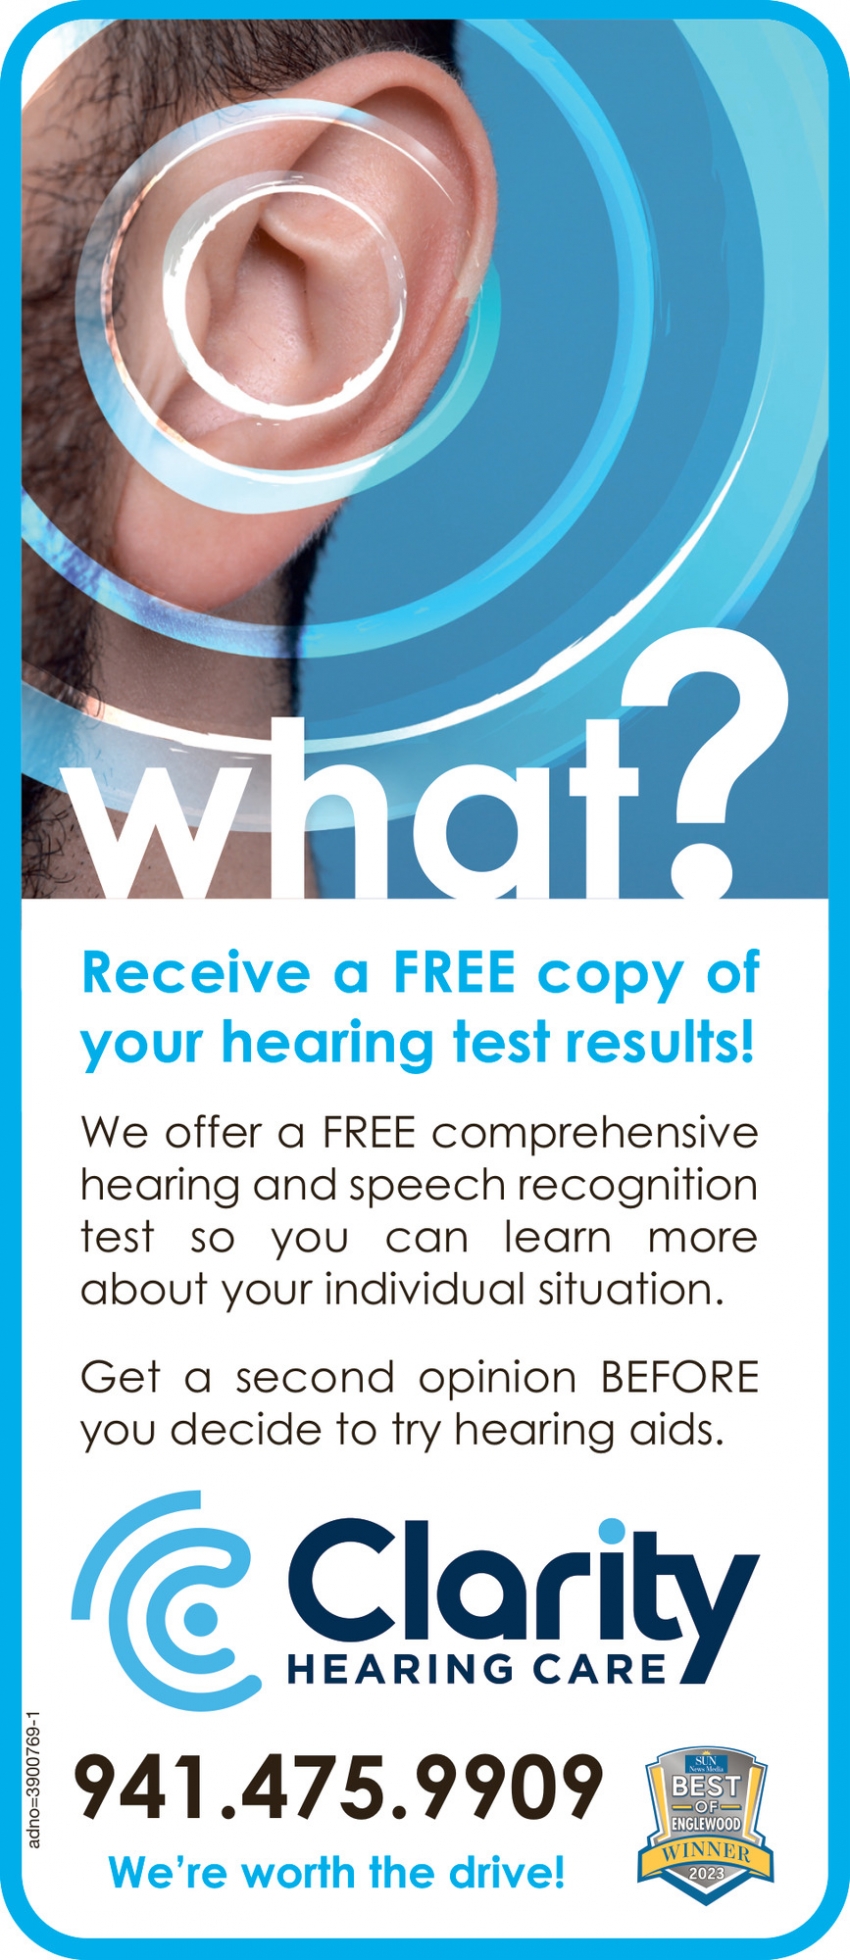 Receive a Free Copy of Your Hearing Test Results!